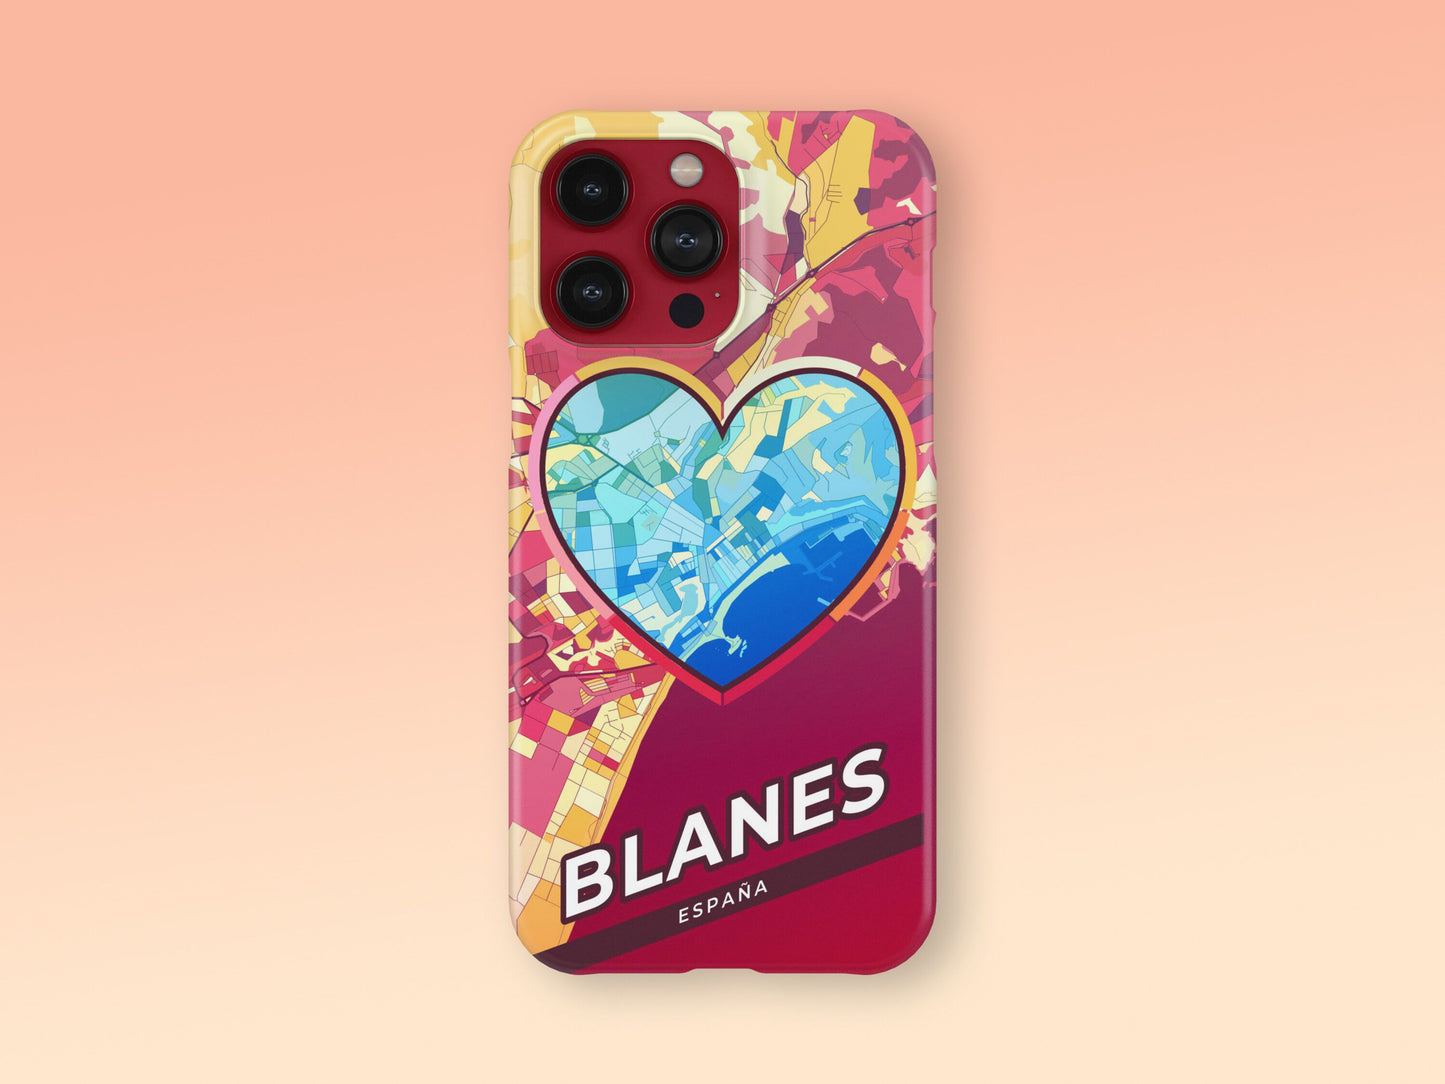 Blanes Spain slim phone case with colorful icon. Birthday, wedding or housewarming gift. Couple match cases. 2